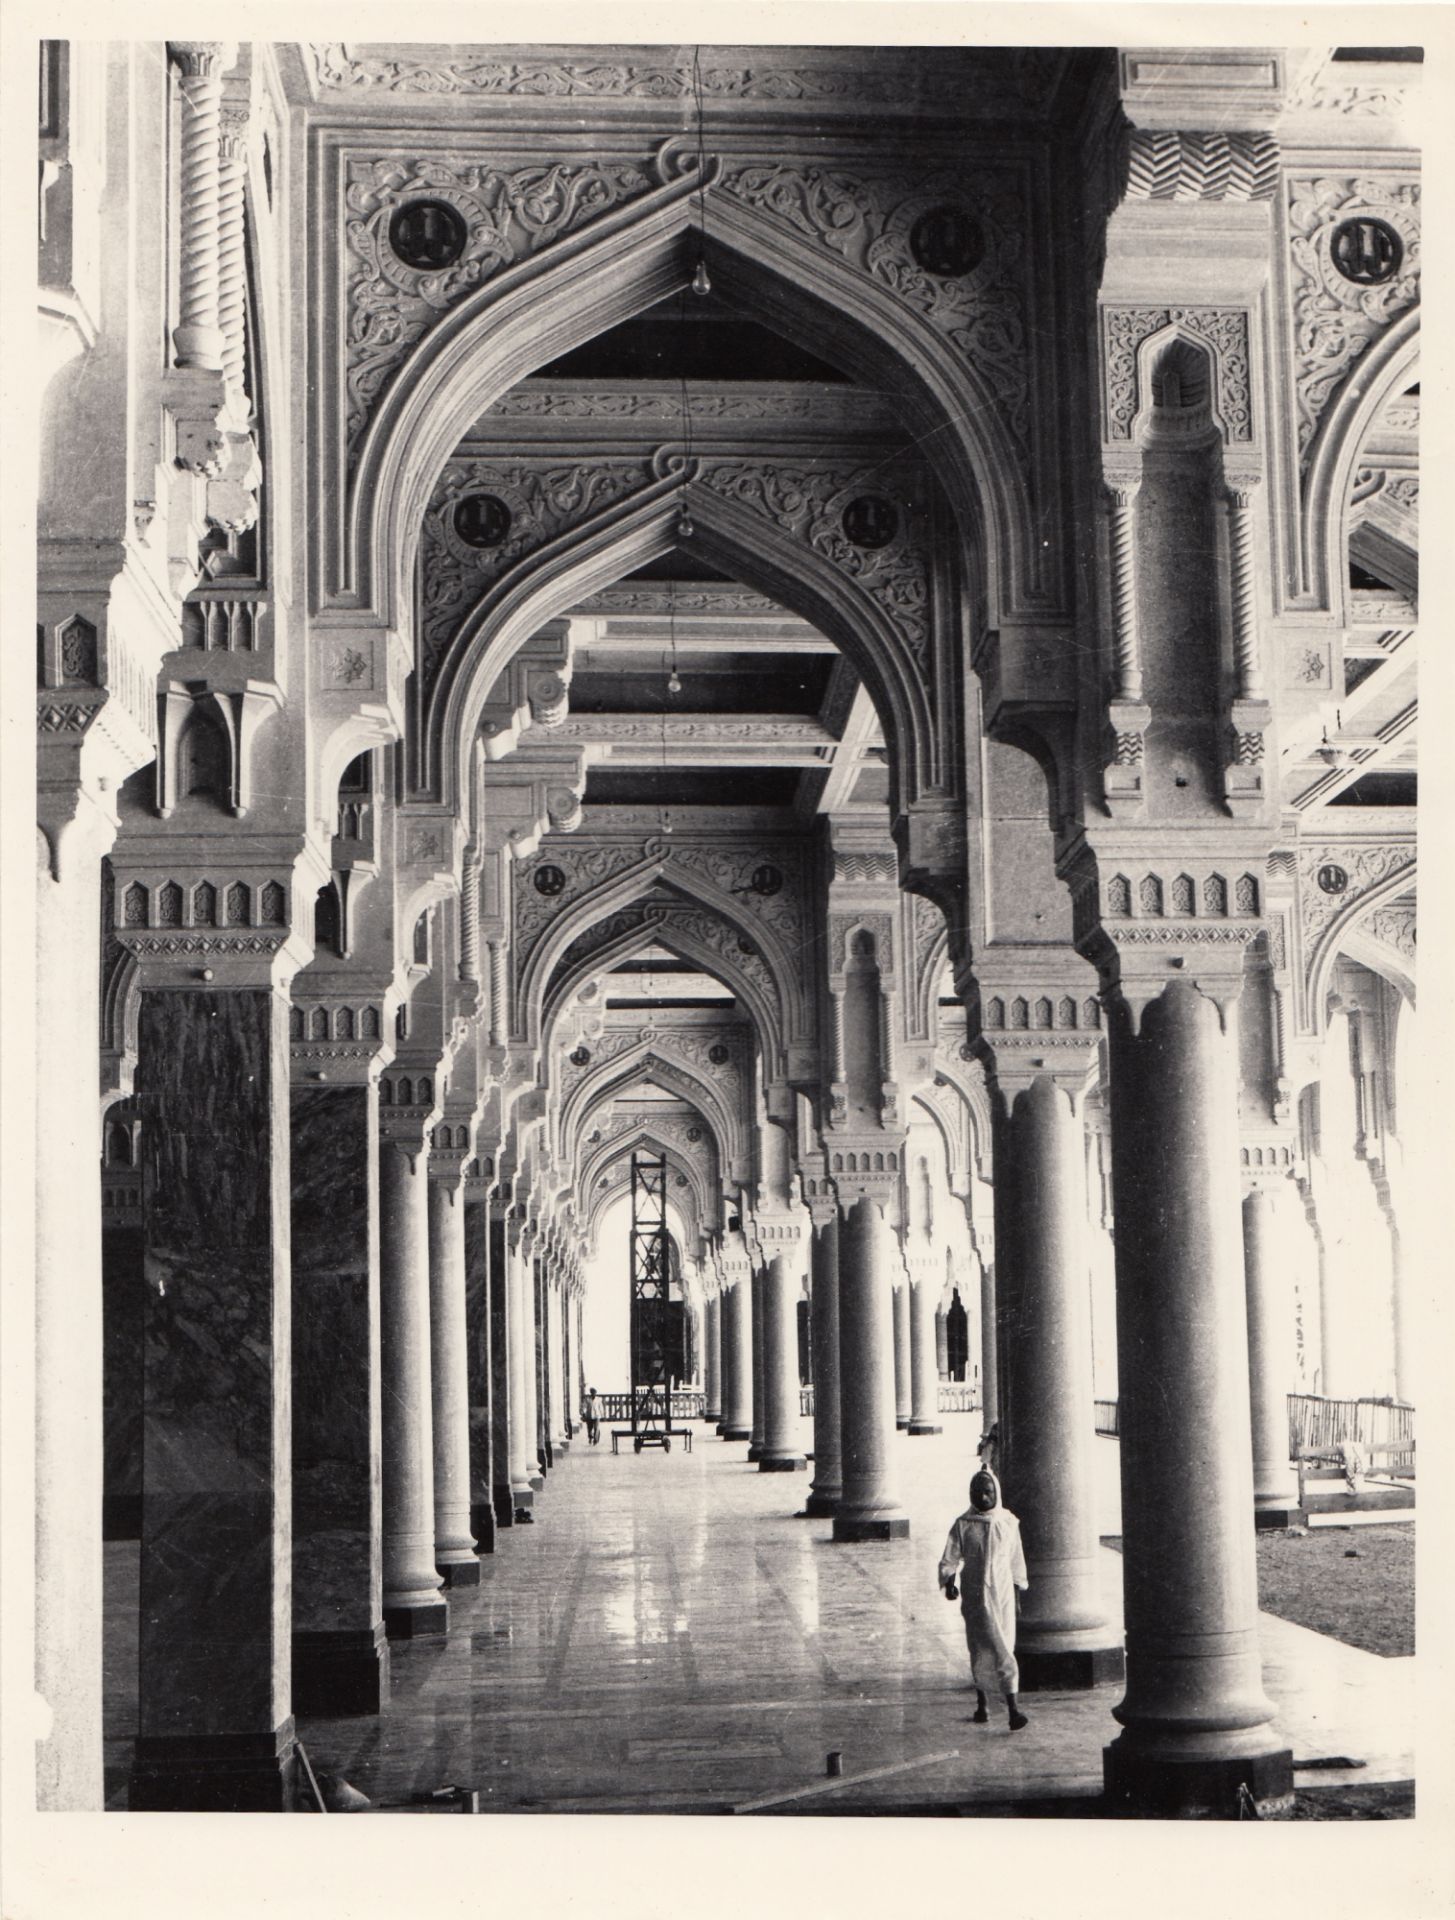 FOURTEEN RARE PHOTOGRAPHS OF THE FIRST EXPANSION OF THE MASJID AL-HARAM DURING KING SAUD BIN ABDULAZ - Image 15 of 16